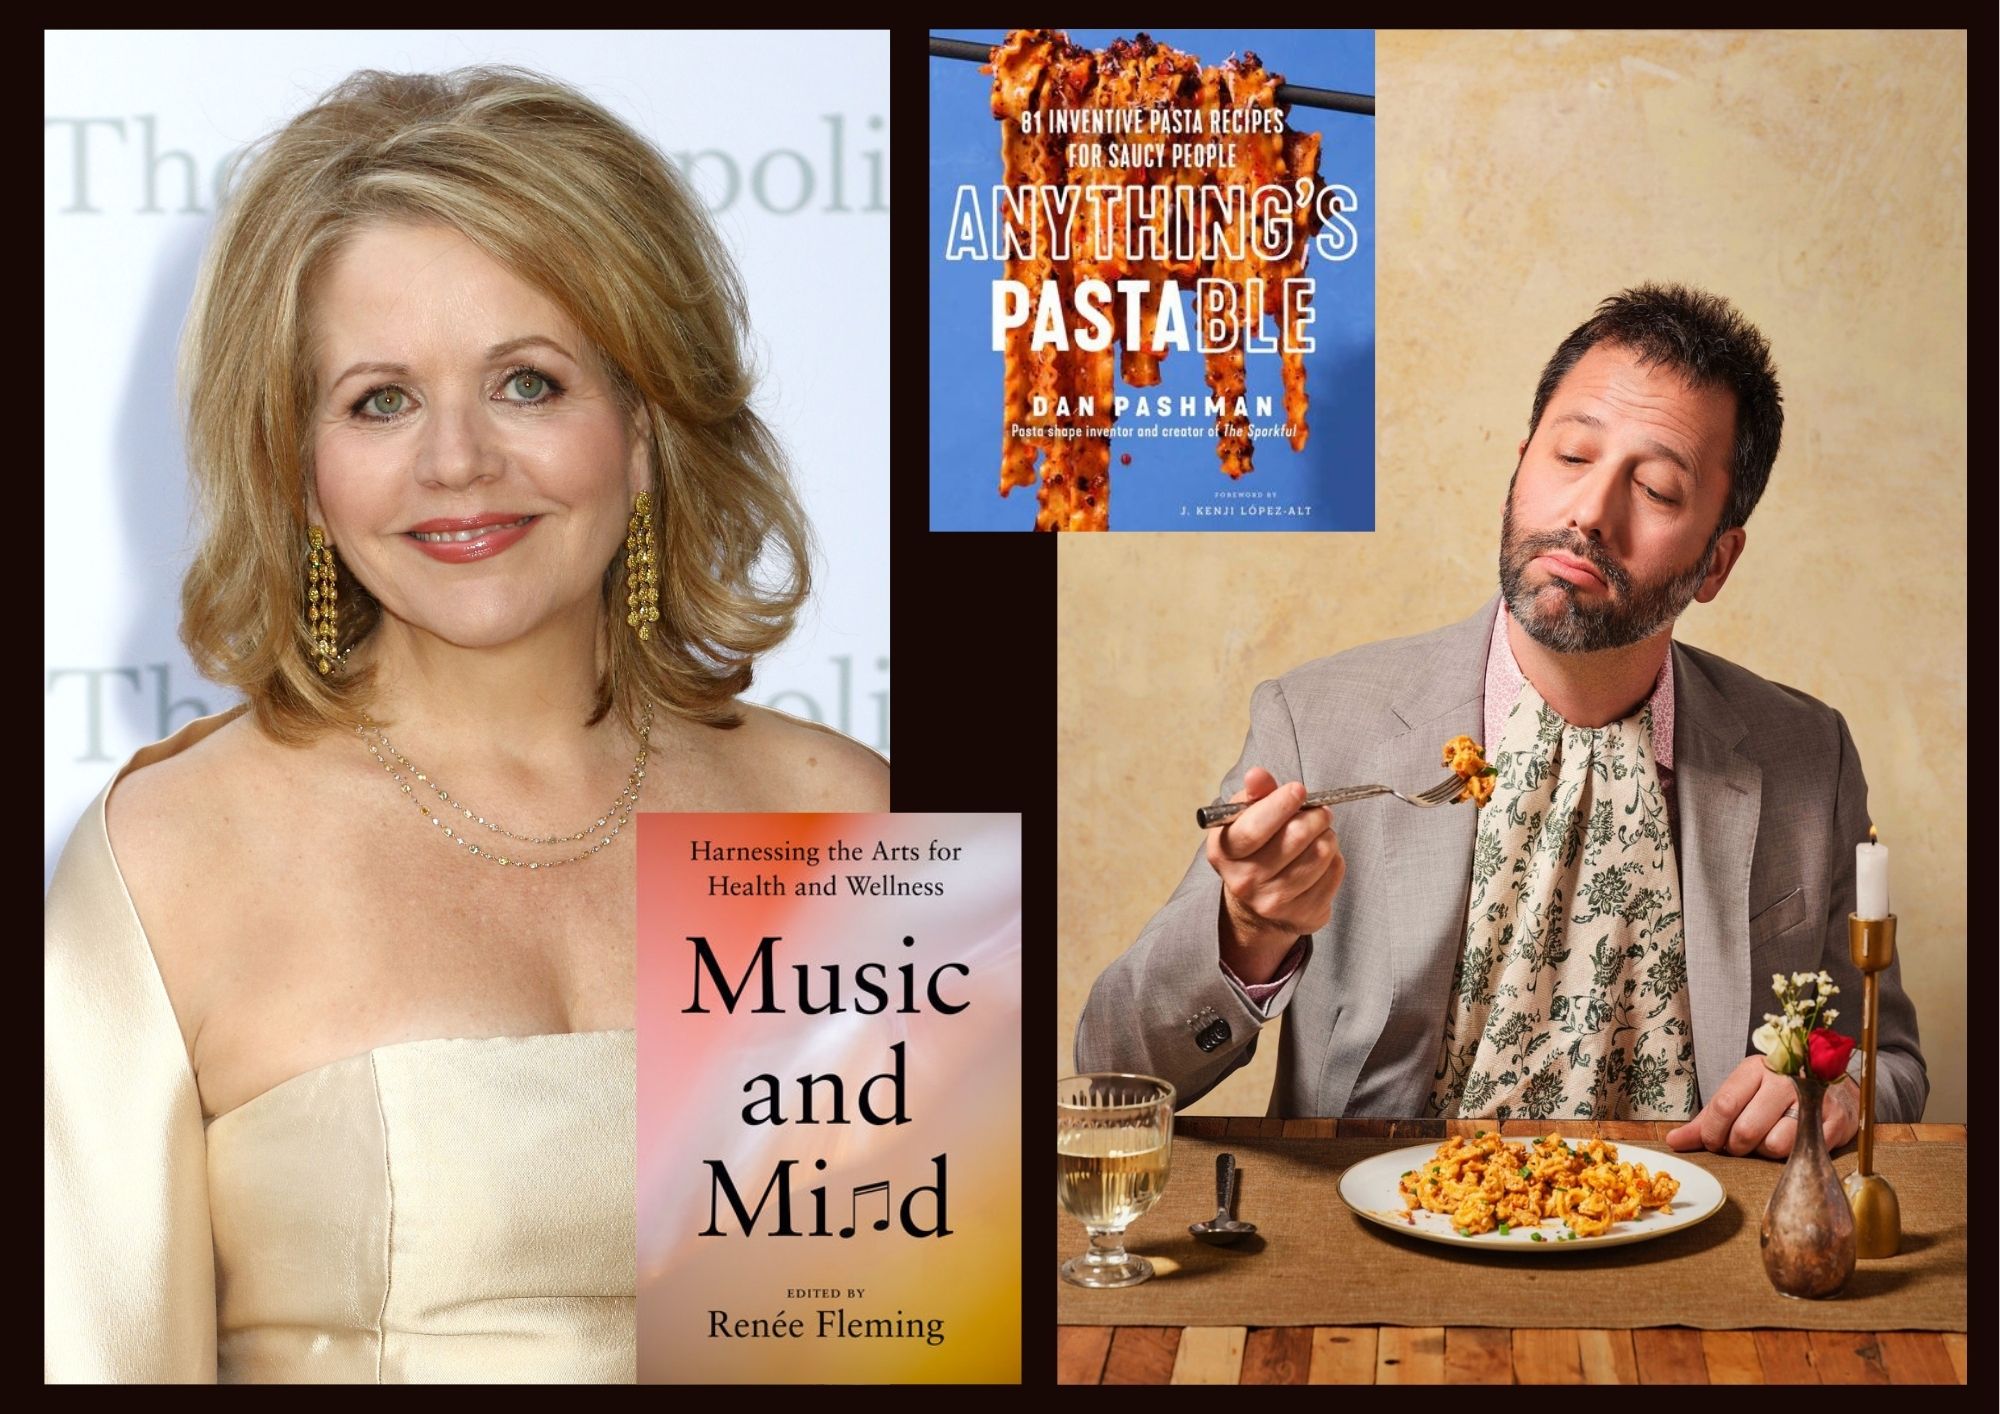 Renée Fleming Discusses the Intersection of Arts and Health, Dan Pashman Explores the Versatility of Pasta in ‘Anything’s Pastable’